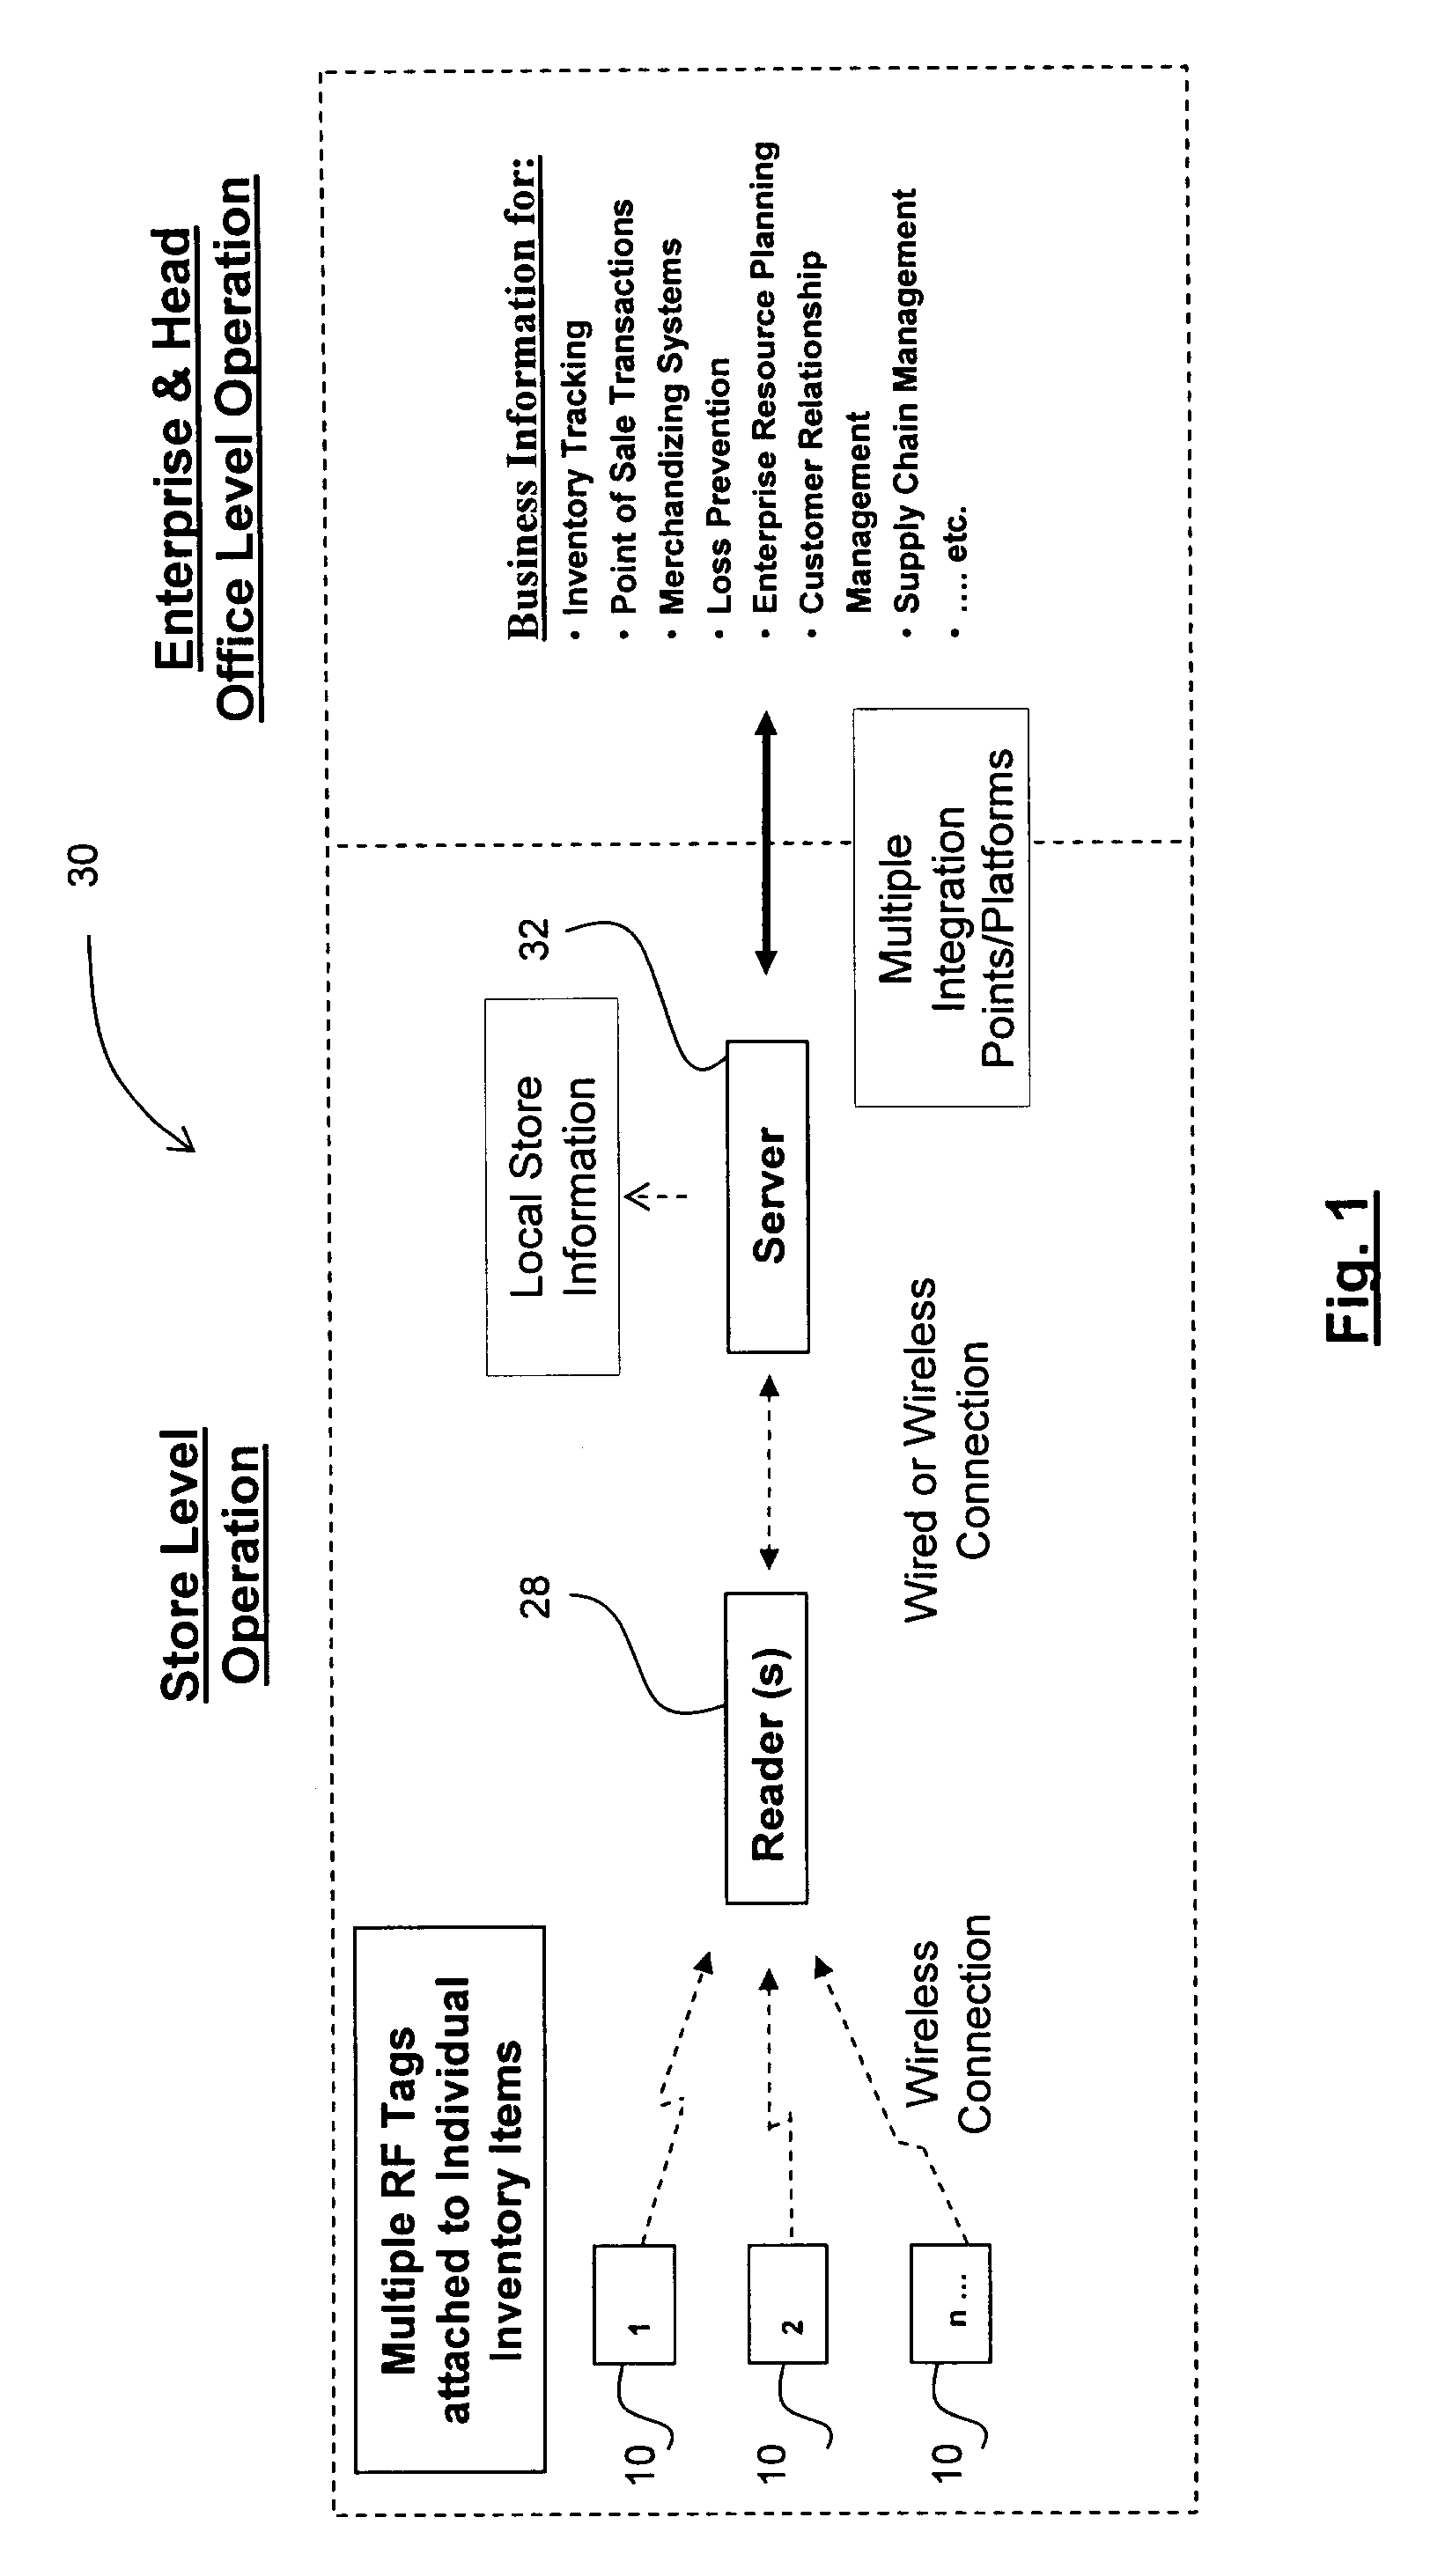 Identification and surveillance device, system and method for individual item level tracking